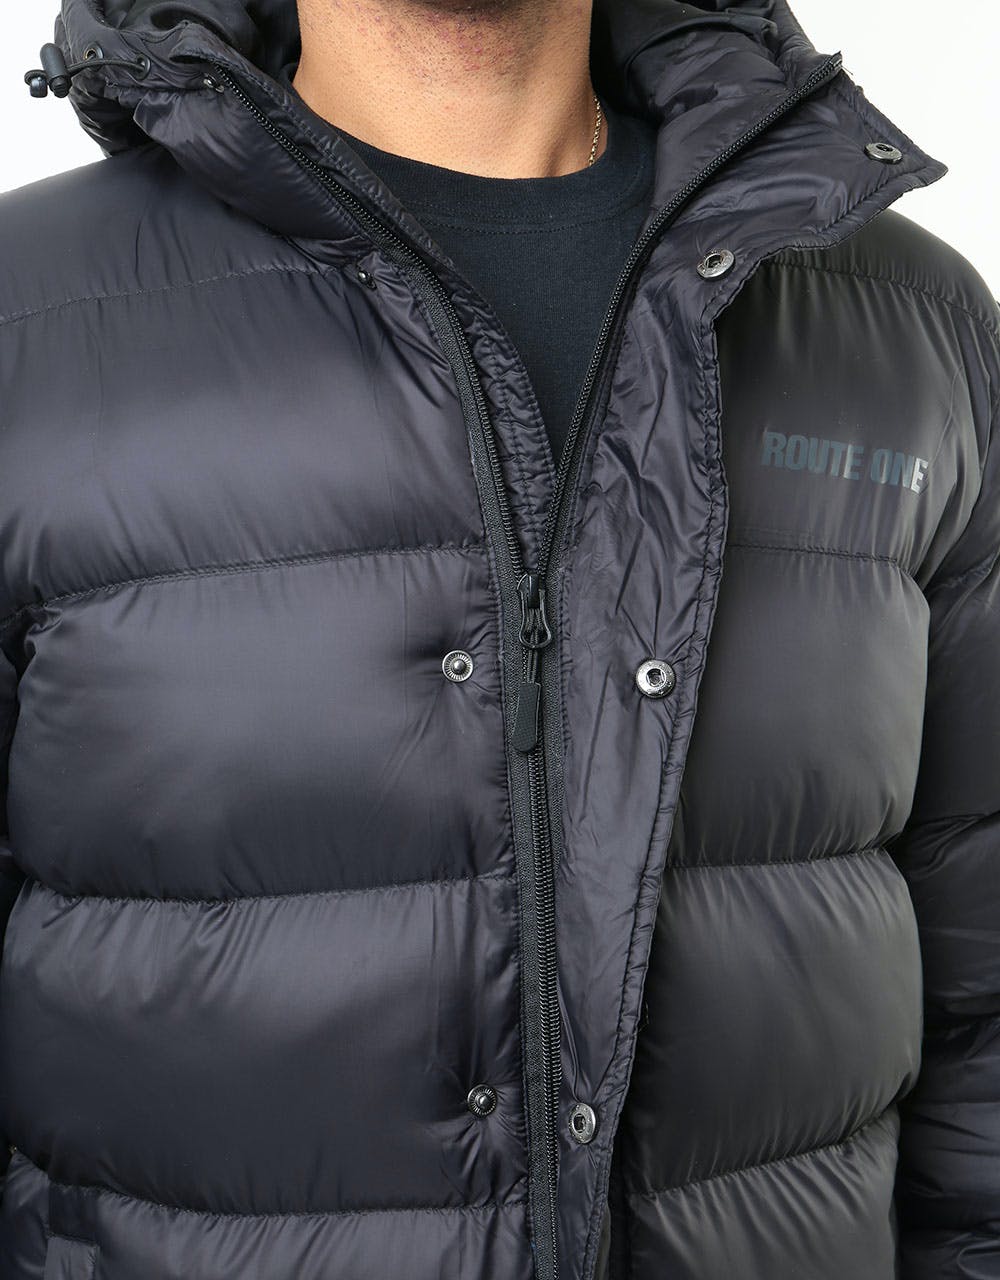 Route One Vostok Hooded Puffer Jacket - Black